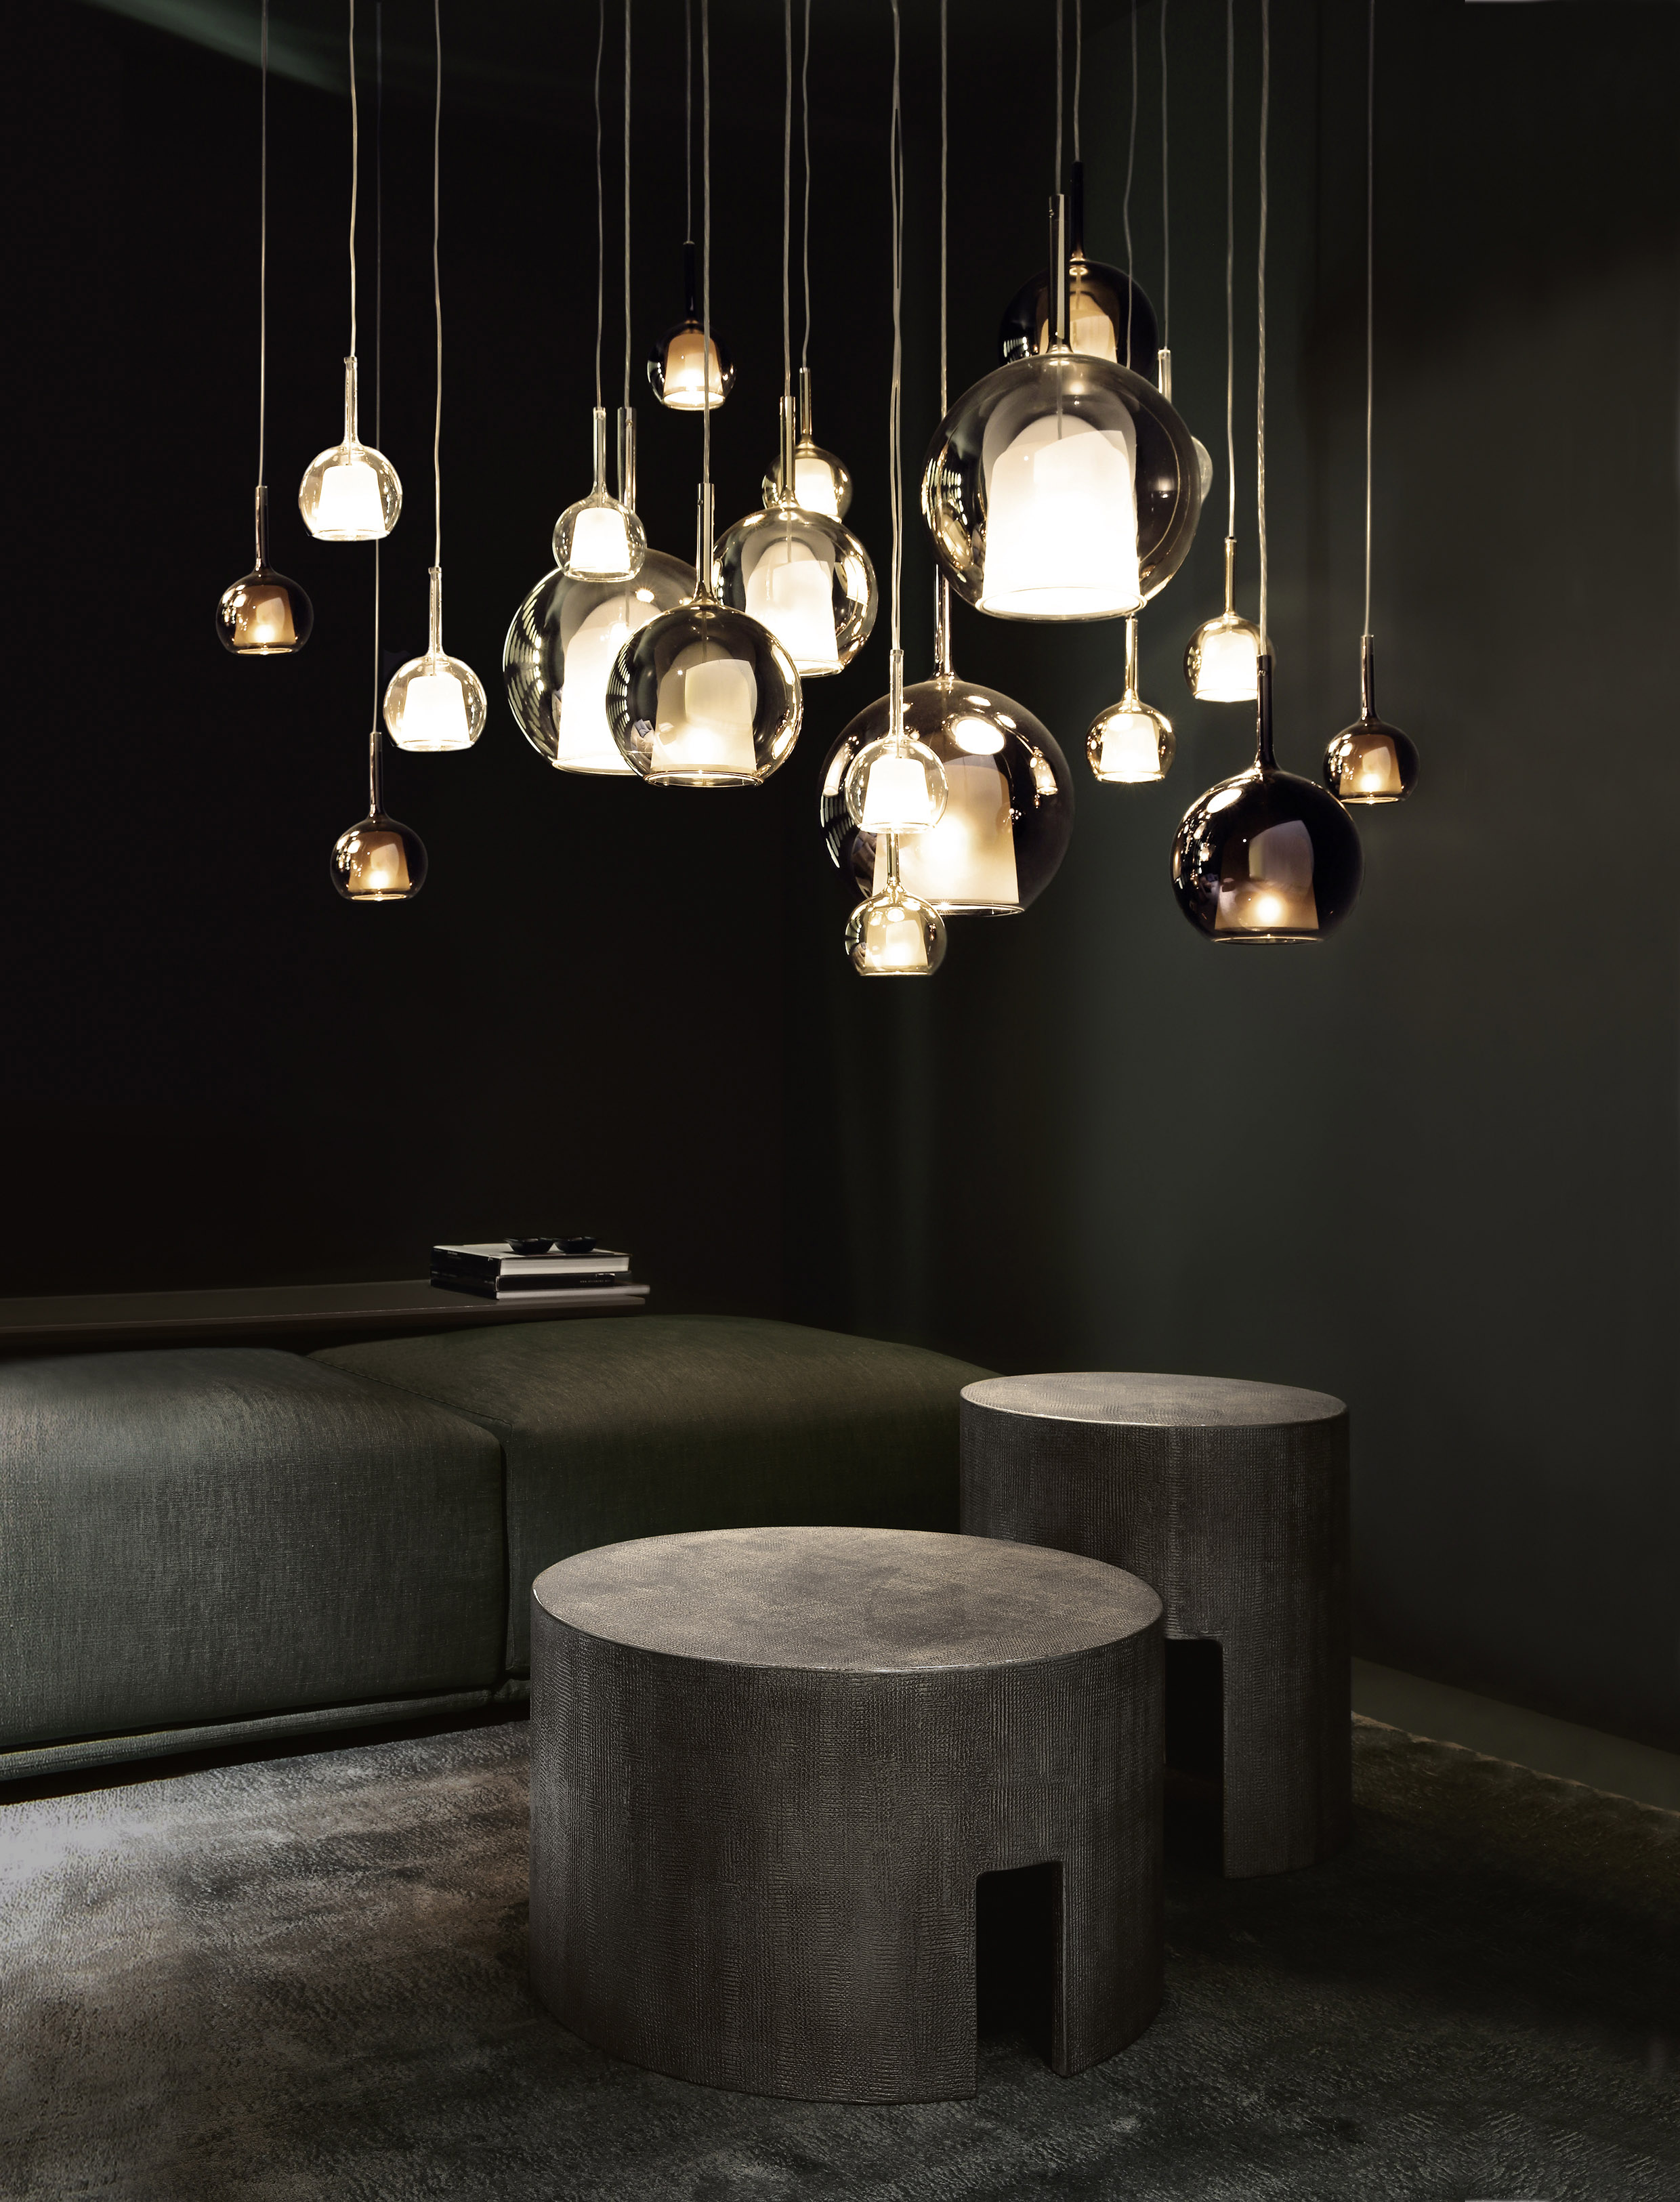 Sources Unlimited Unveils the Glo Lamp Collection by Penta Light